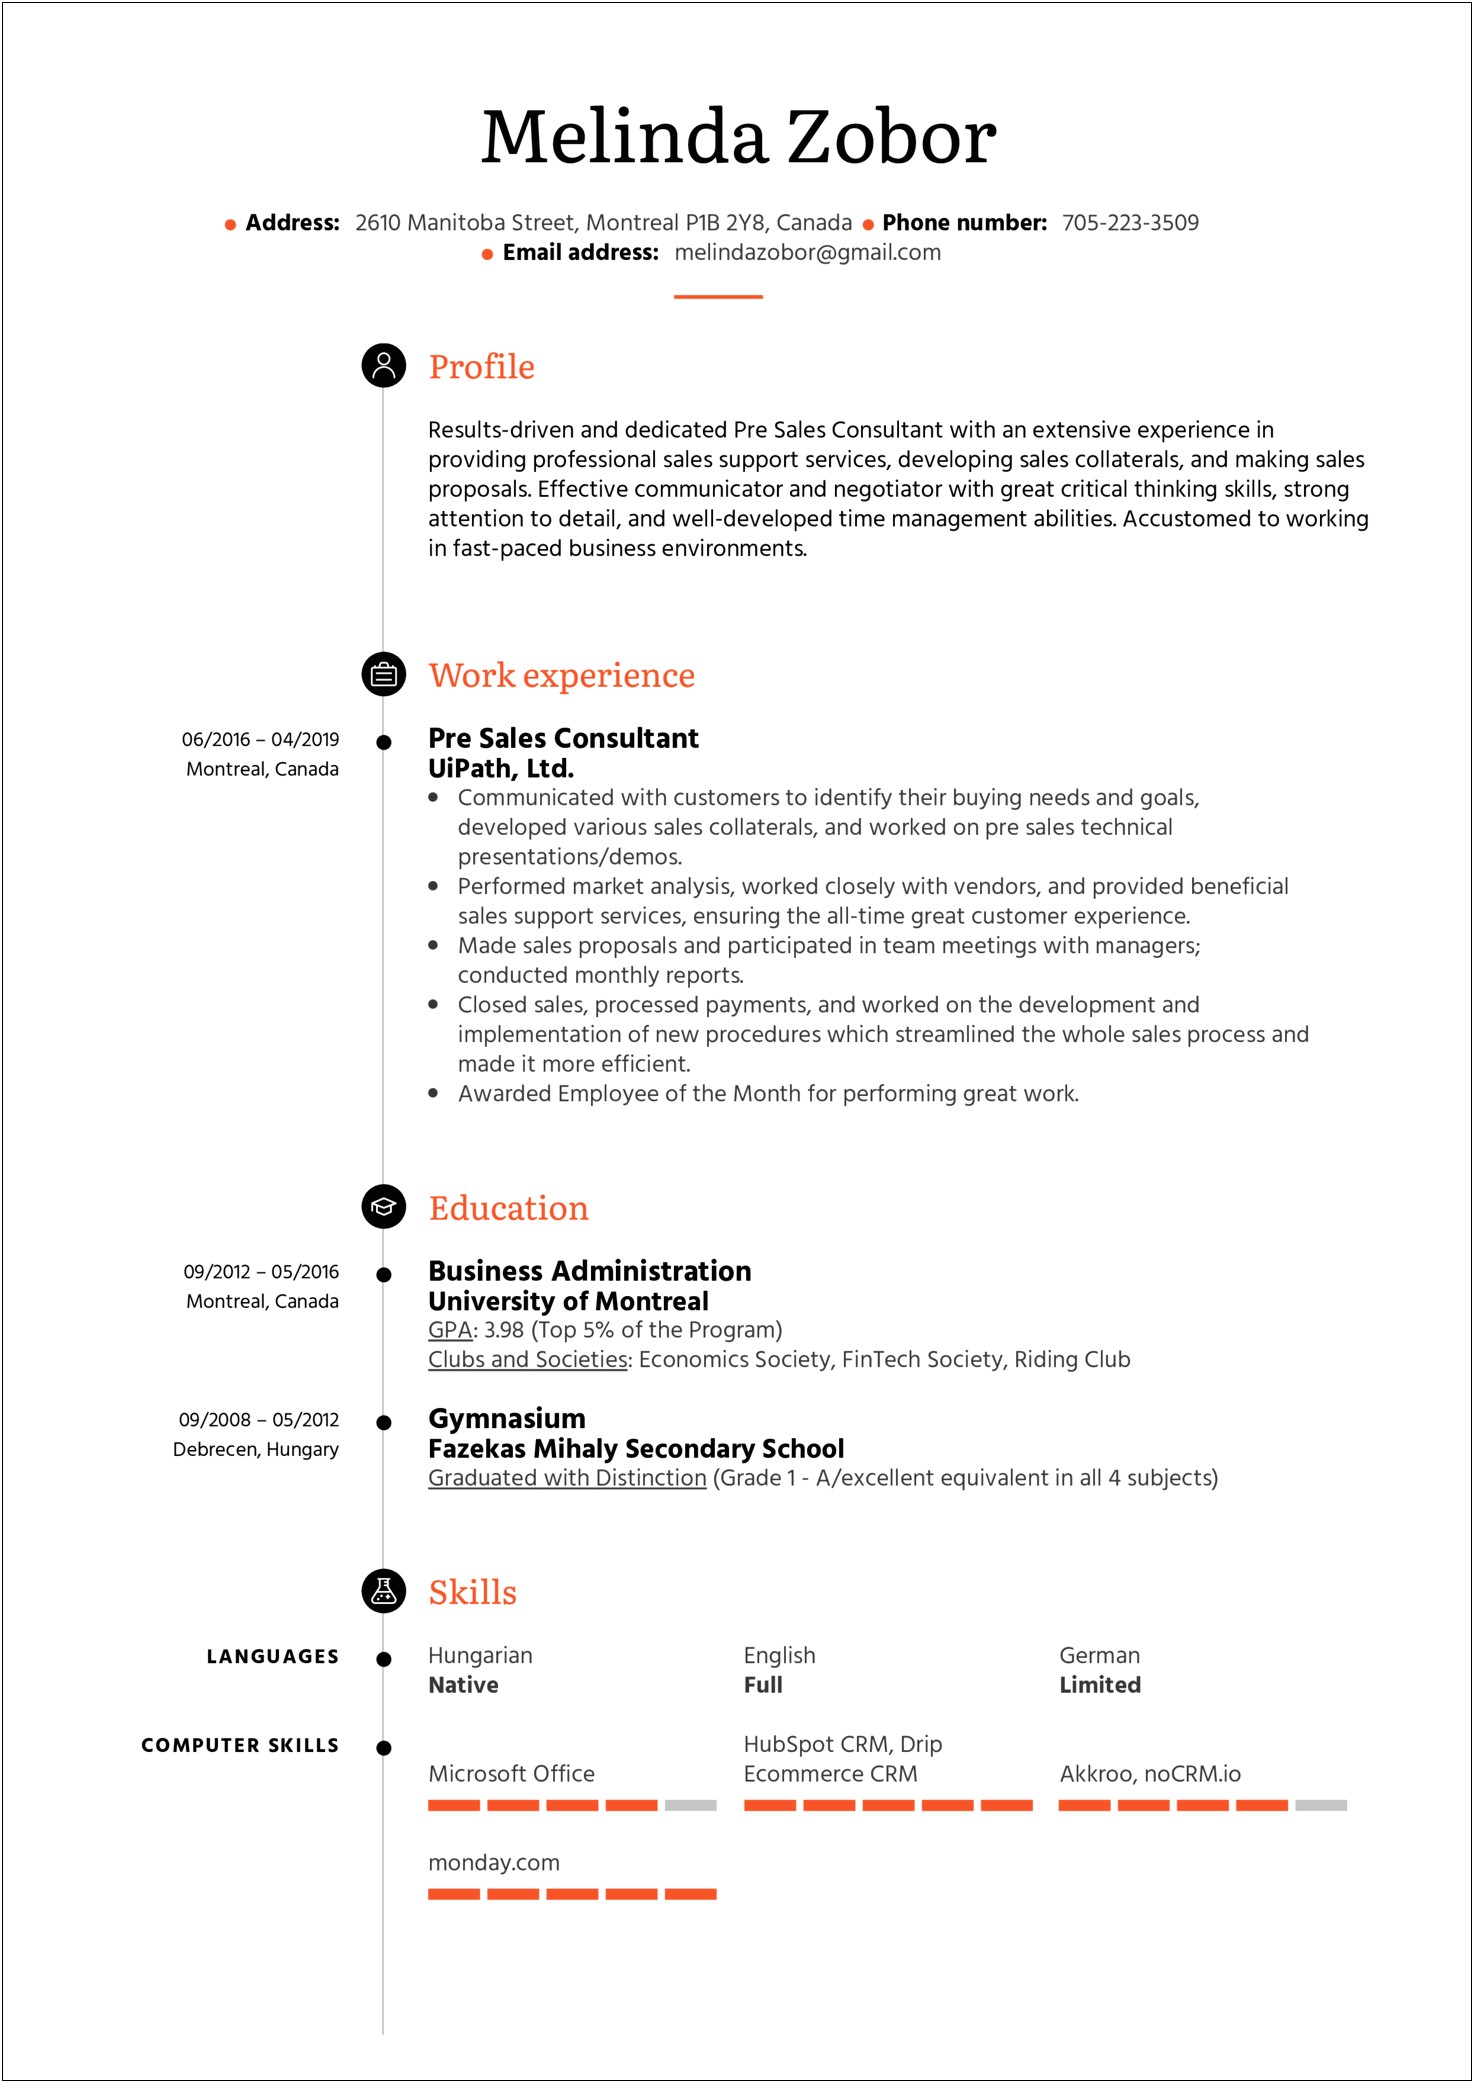 Resume Summary For Dynamics Crm Professional